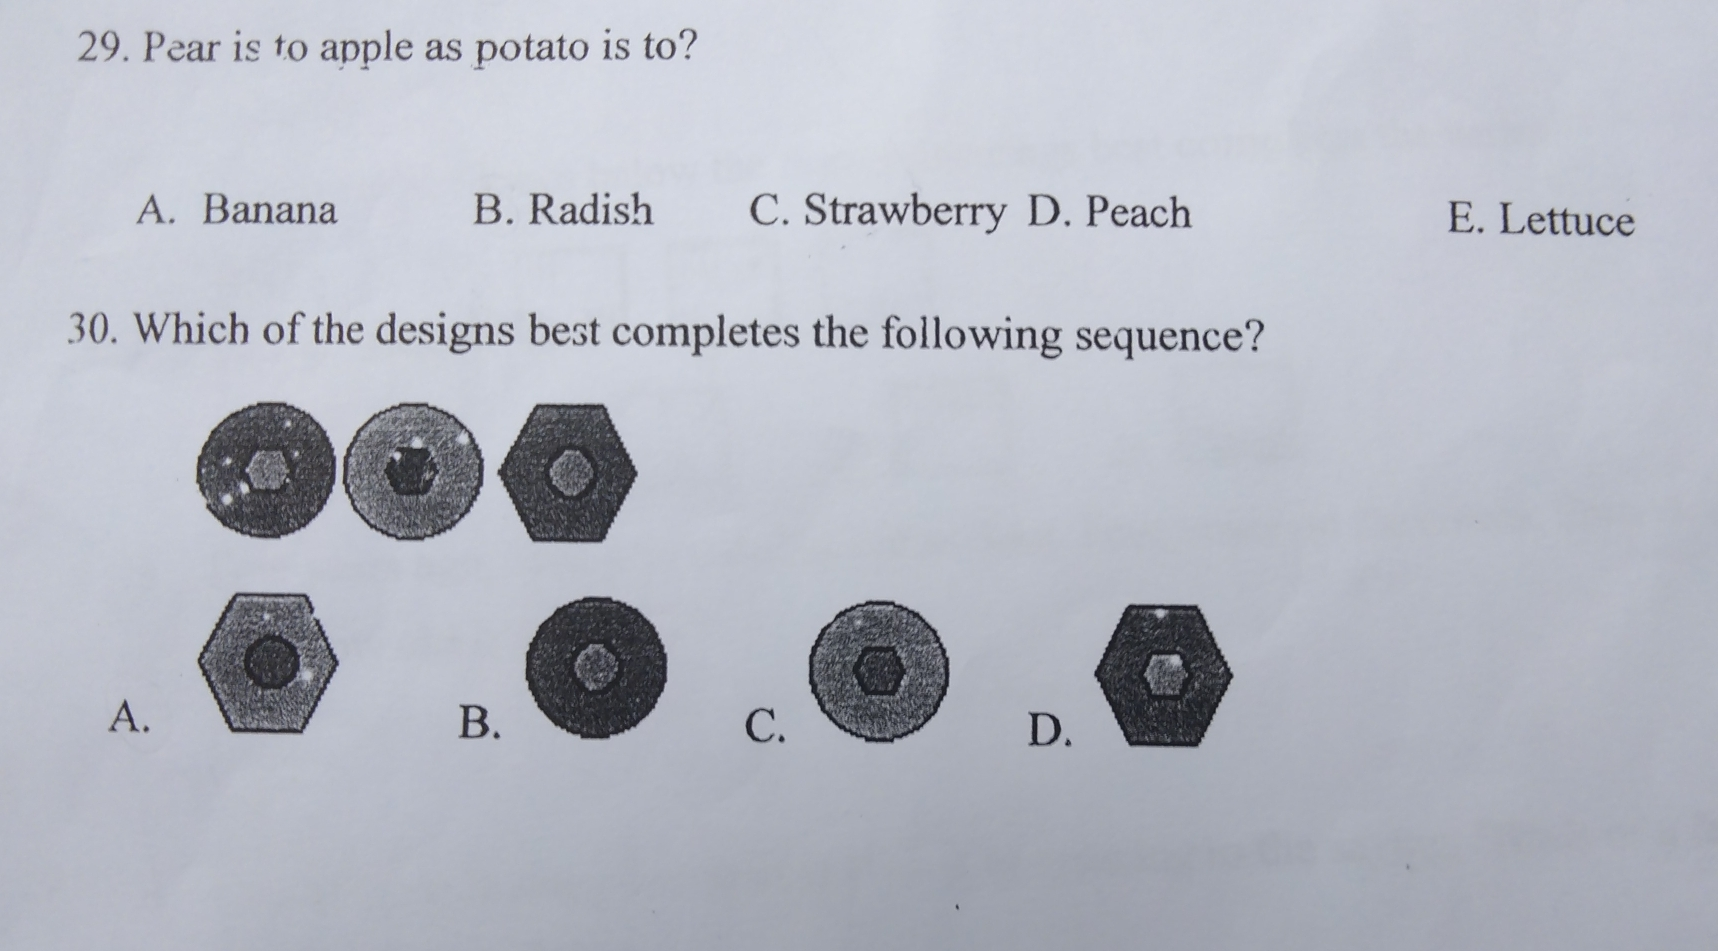 29. Pear is to apple as potato is to? A. Banana B. Radish C. Strawberry D. Peach E. Lettuce 30. Which of the designs best completes the following sequence? A. B. C. D.